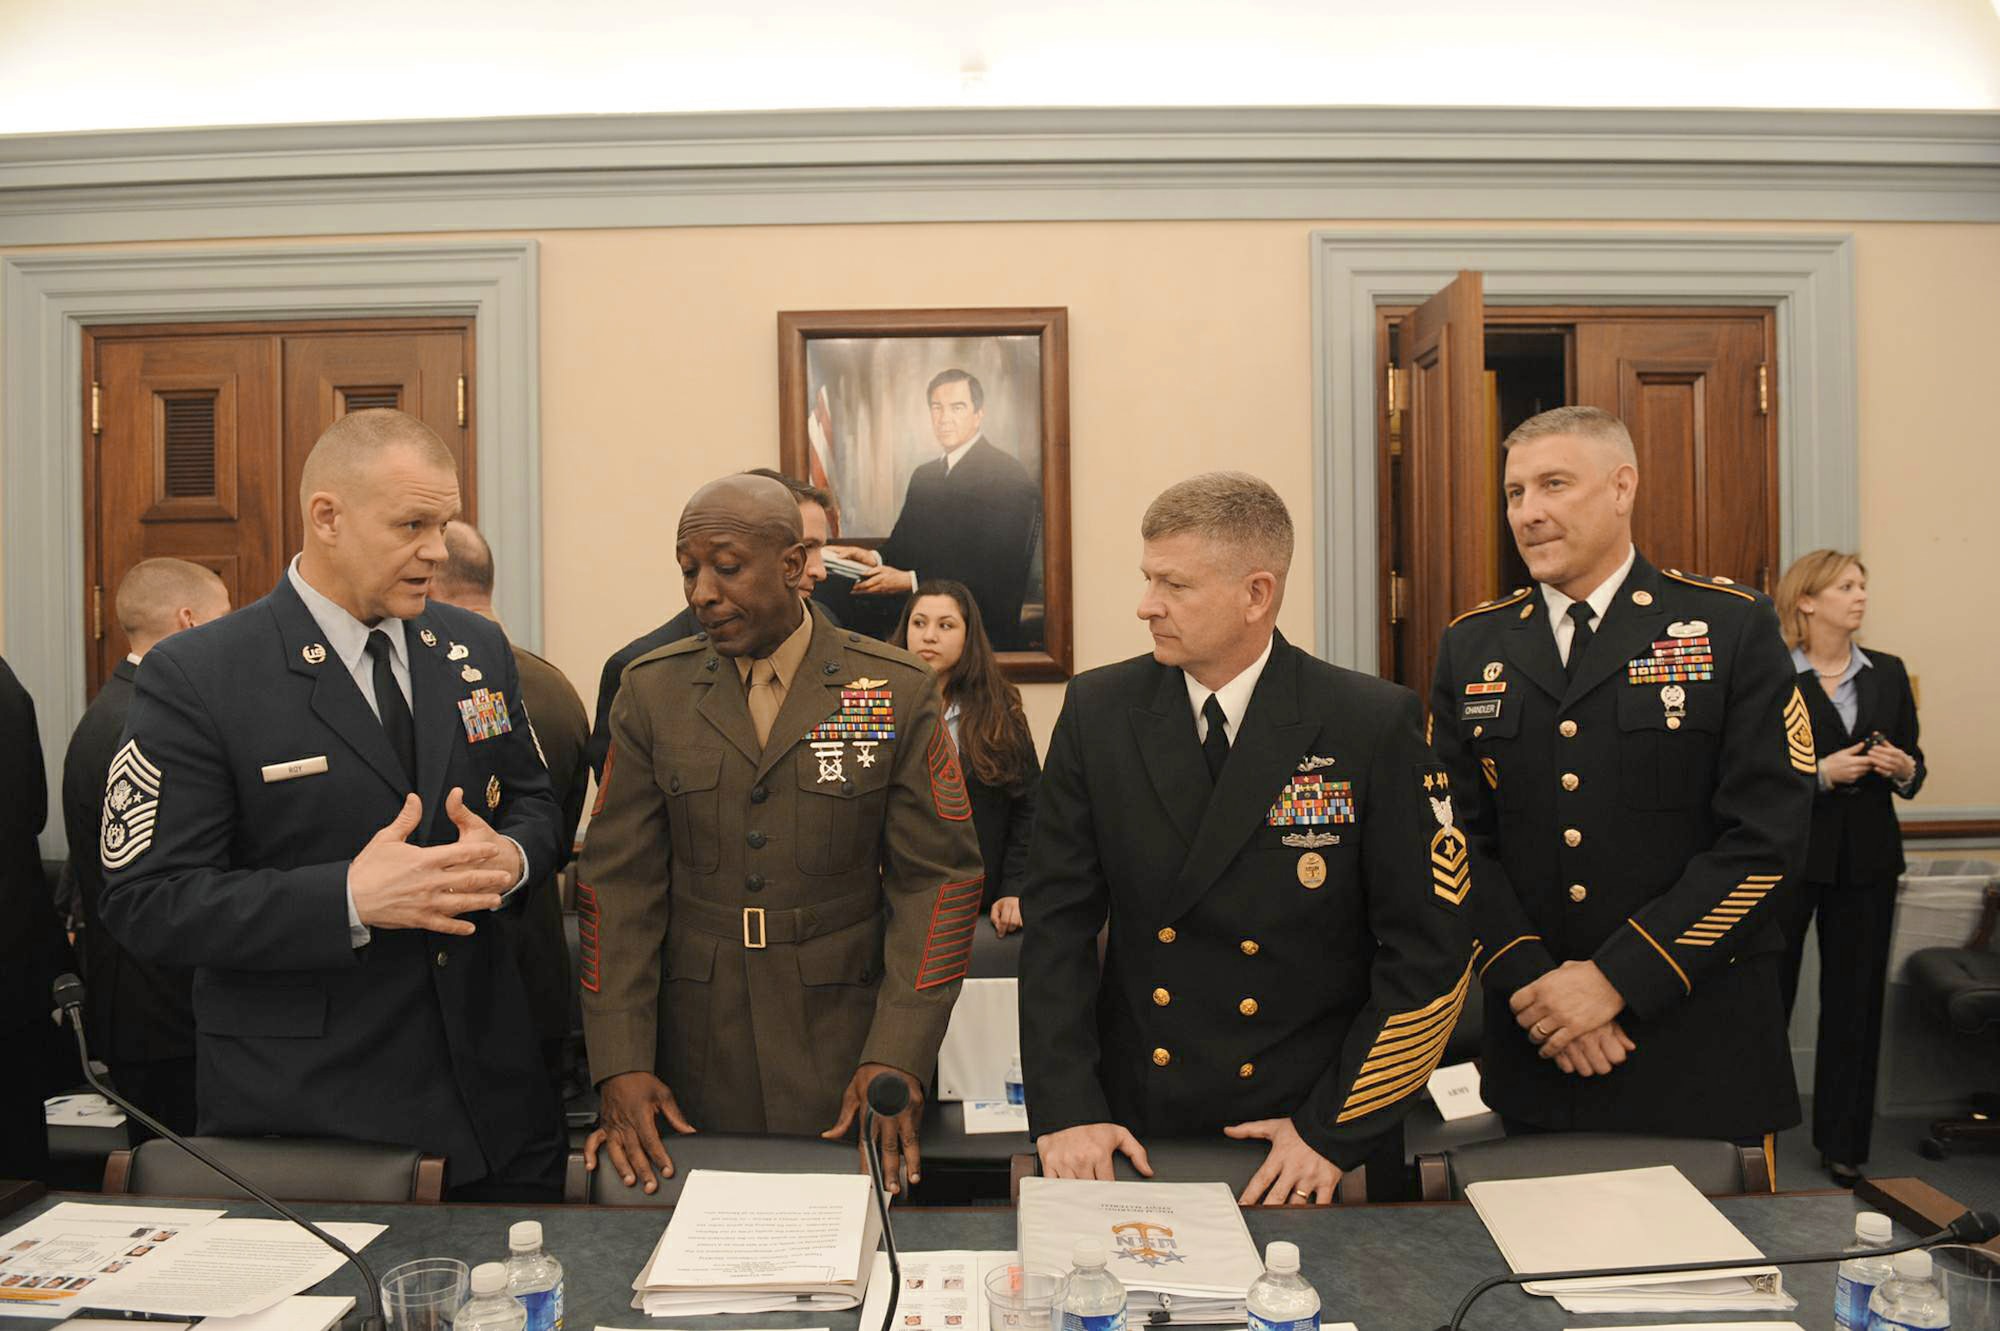 The senior enlisted leaders from the Air Force, Marines, Navy and Army testify before the House Subcommittee for Military Construction, Veterans Affairs and Related Agencies March 30, 2011, in Washington. From left are Chief Master Sgt. of the Air Force James A. Roy, Sergeant Major of the Marine Corps Carlton Kent, Master Chief Petty Officer of the Navy Rick West and Sergeant Major of the Army Raymond Chandler. (U.S. Air Force photo/Scott M. Ash)